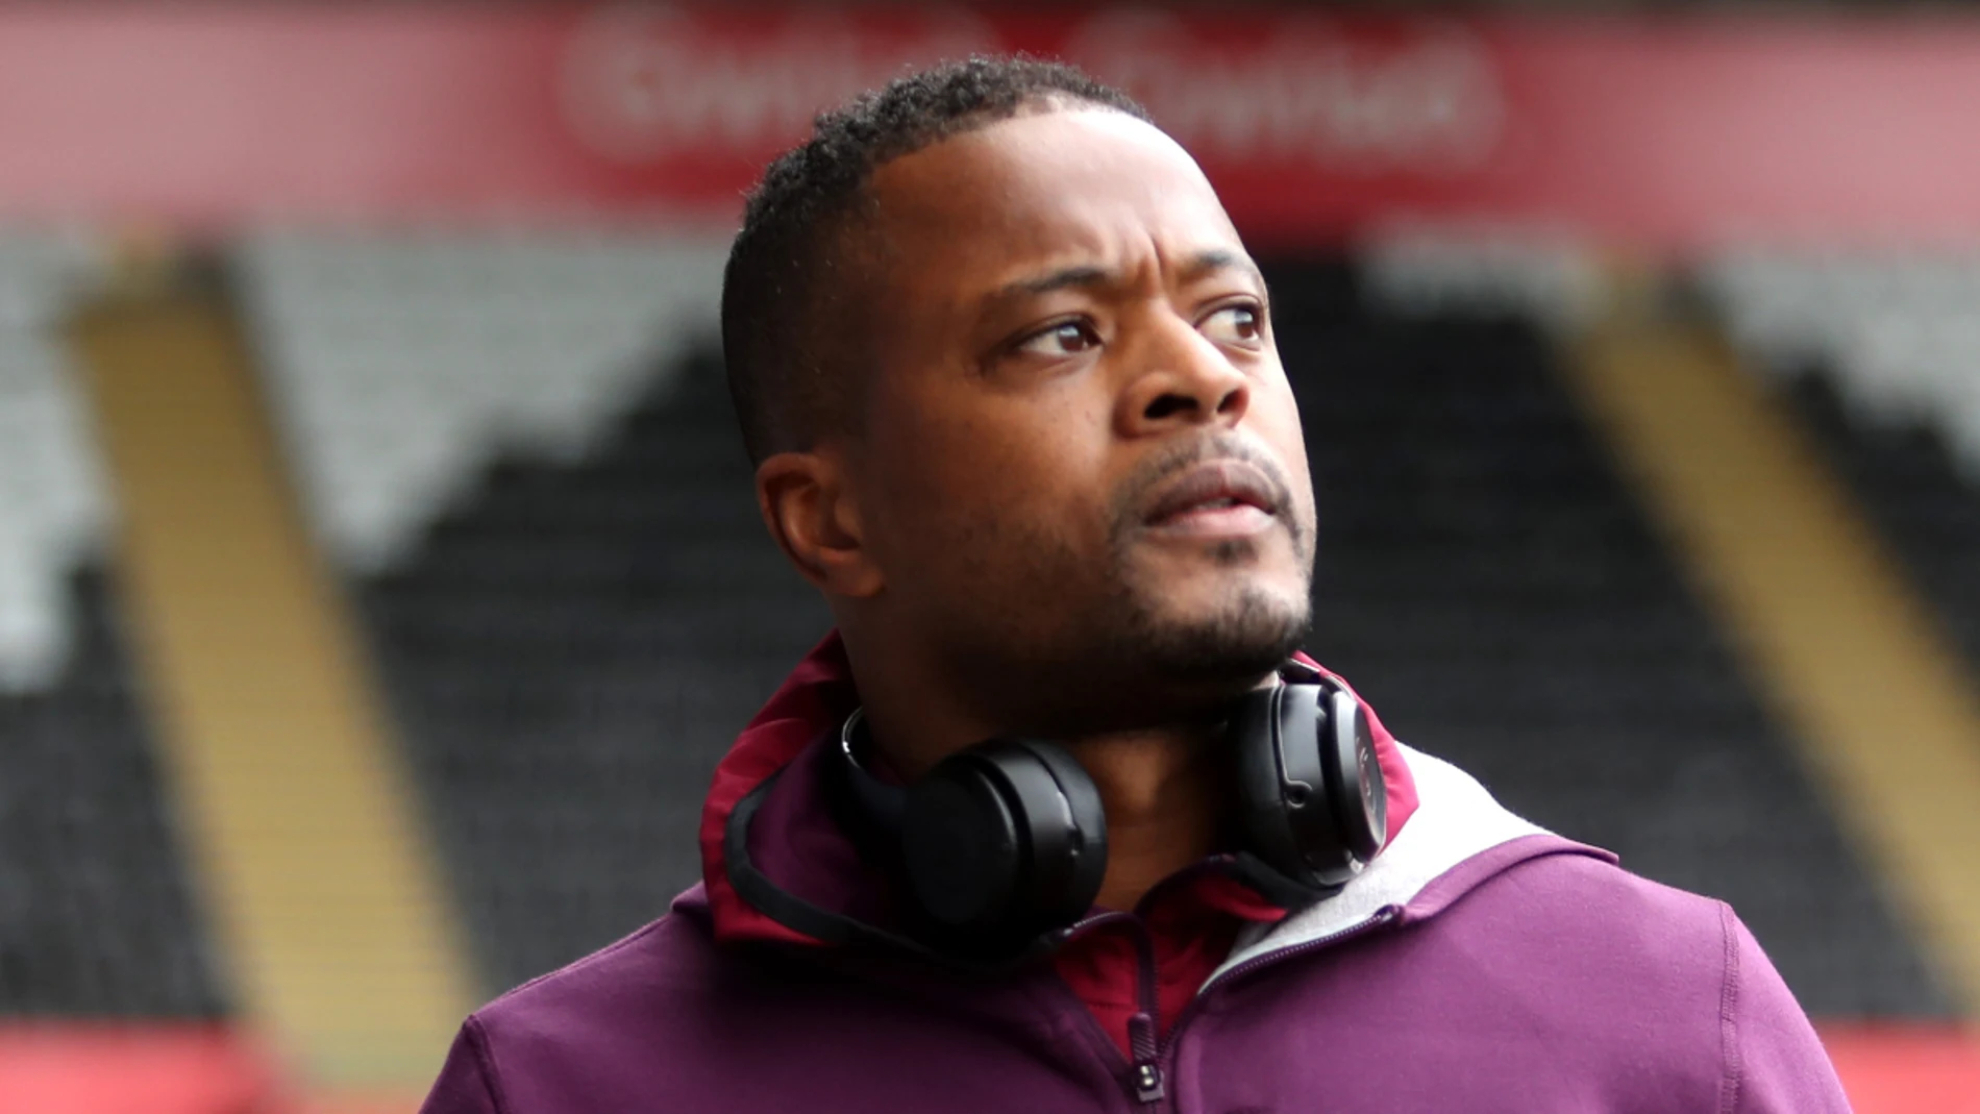 Patrice Evra: “In the world of football, if you say you’re gay, it’s all over.”